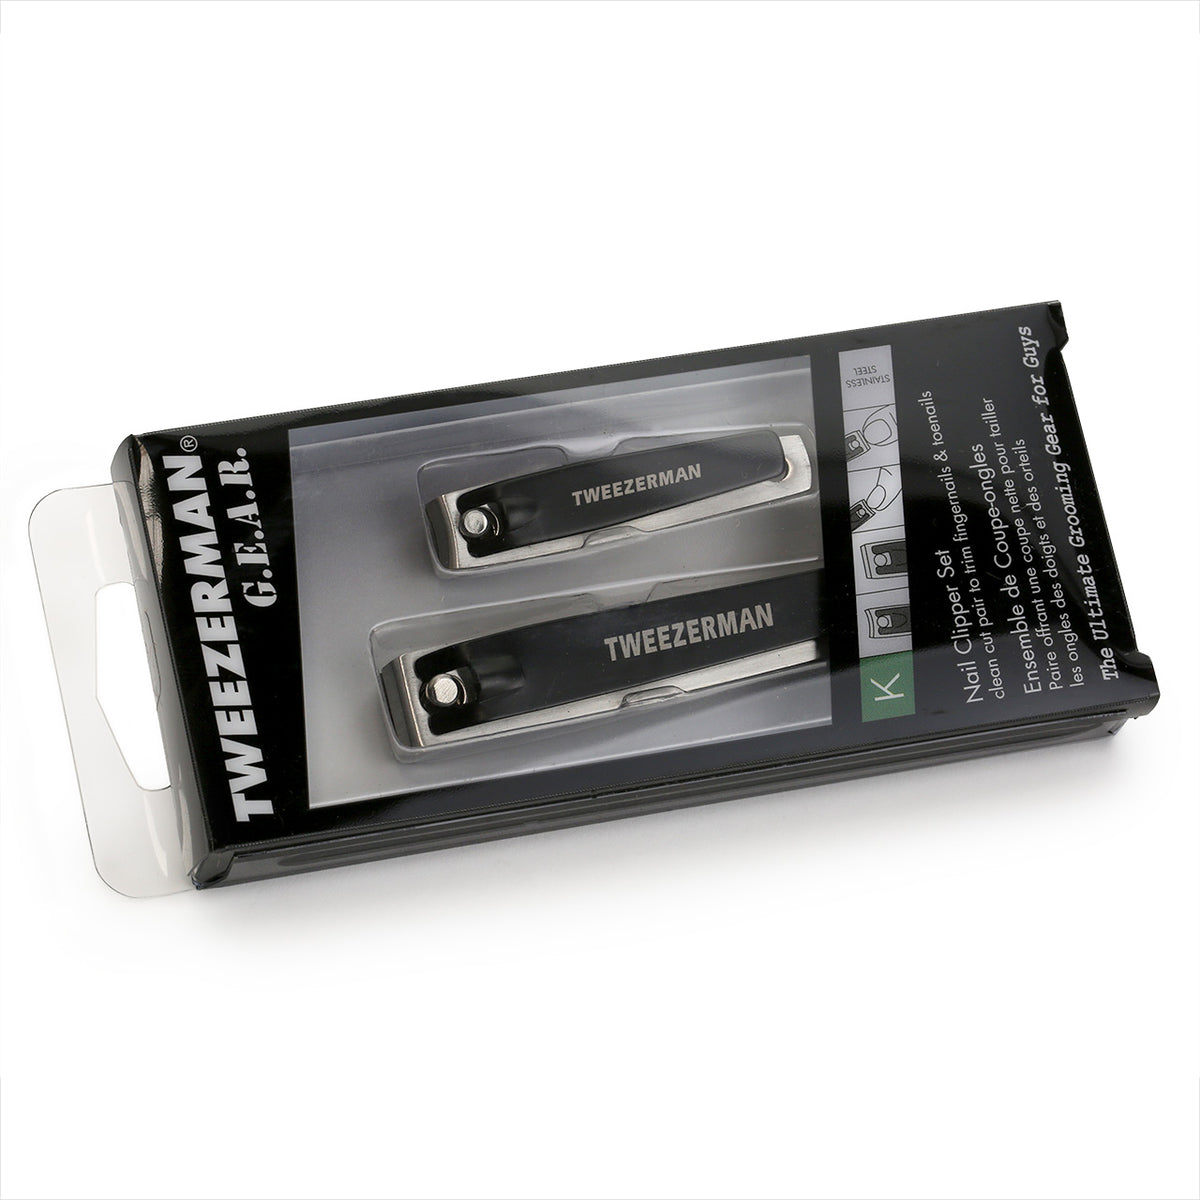 Tweezerman Fingernail and Toenail clipper pack is see through protective plastic pack.